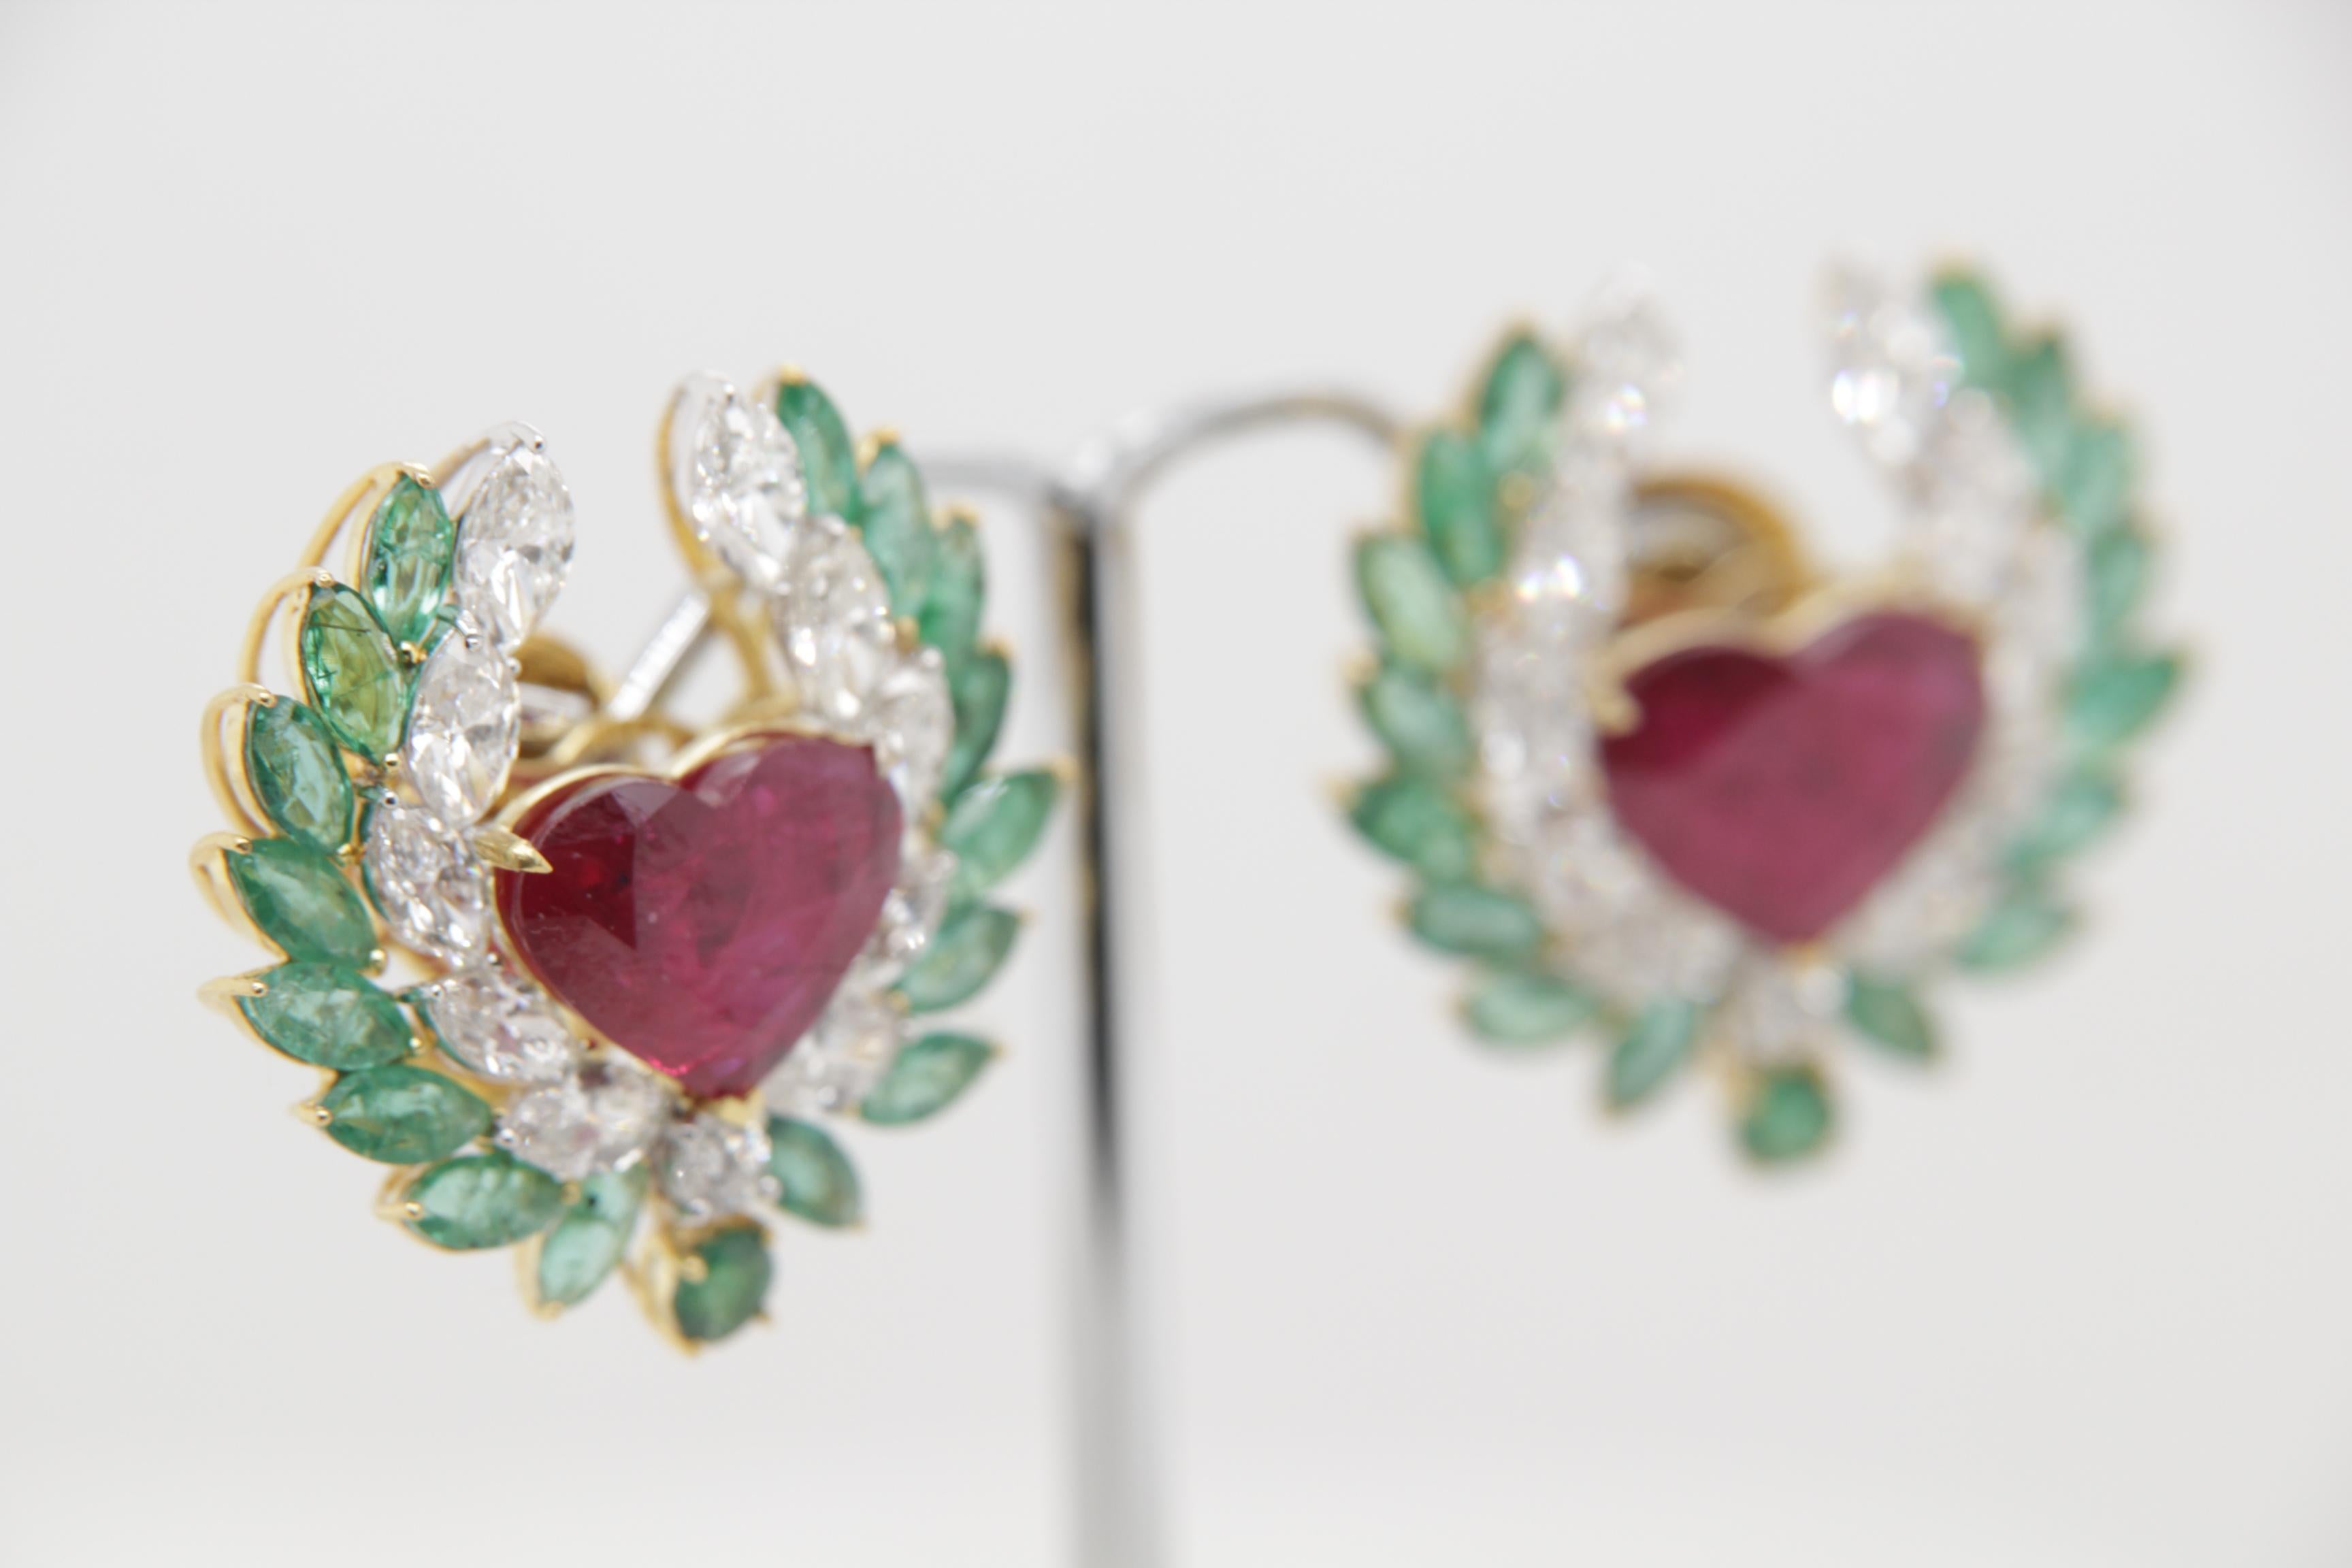 A brand new thai ruby earring mounted with emeralds and diamonds in 18 karat gold. The one ruby weighs 3.51 carat is certified by Carat Gem Lab (CGL) as natural, 'No heat' and 'Intense Red'. The total ruby weighs 7.72 carats. The total emerald